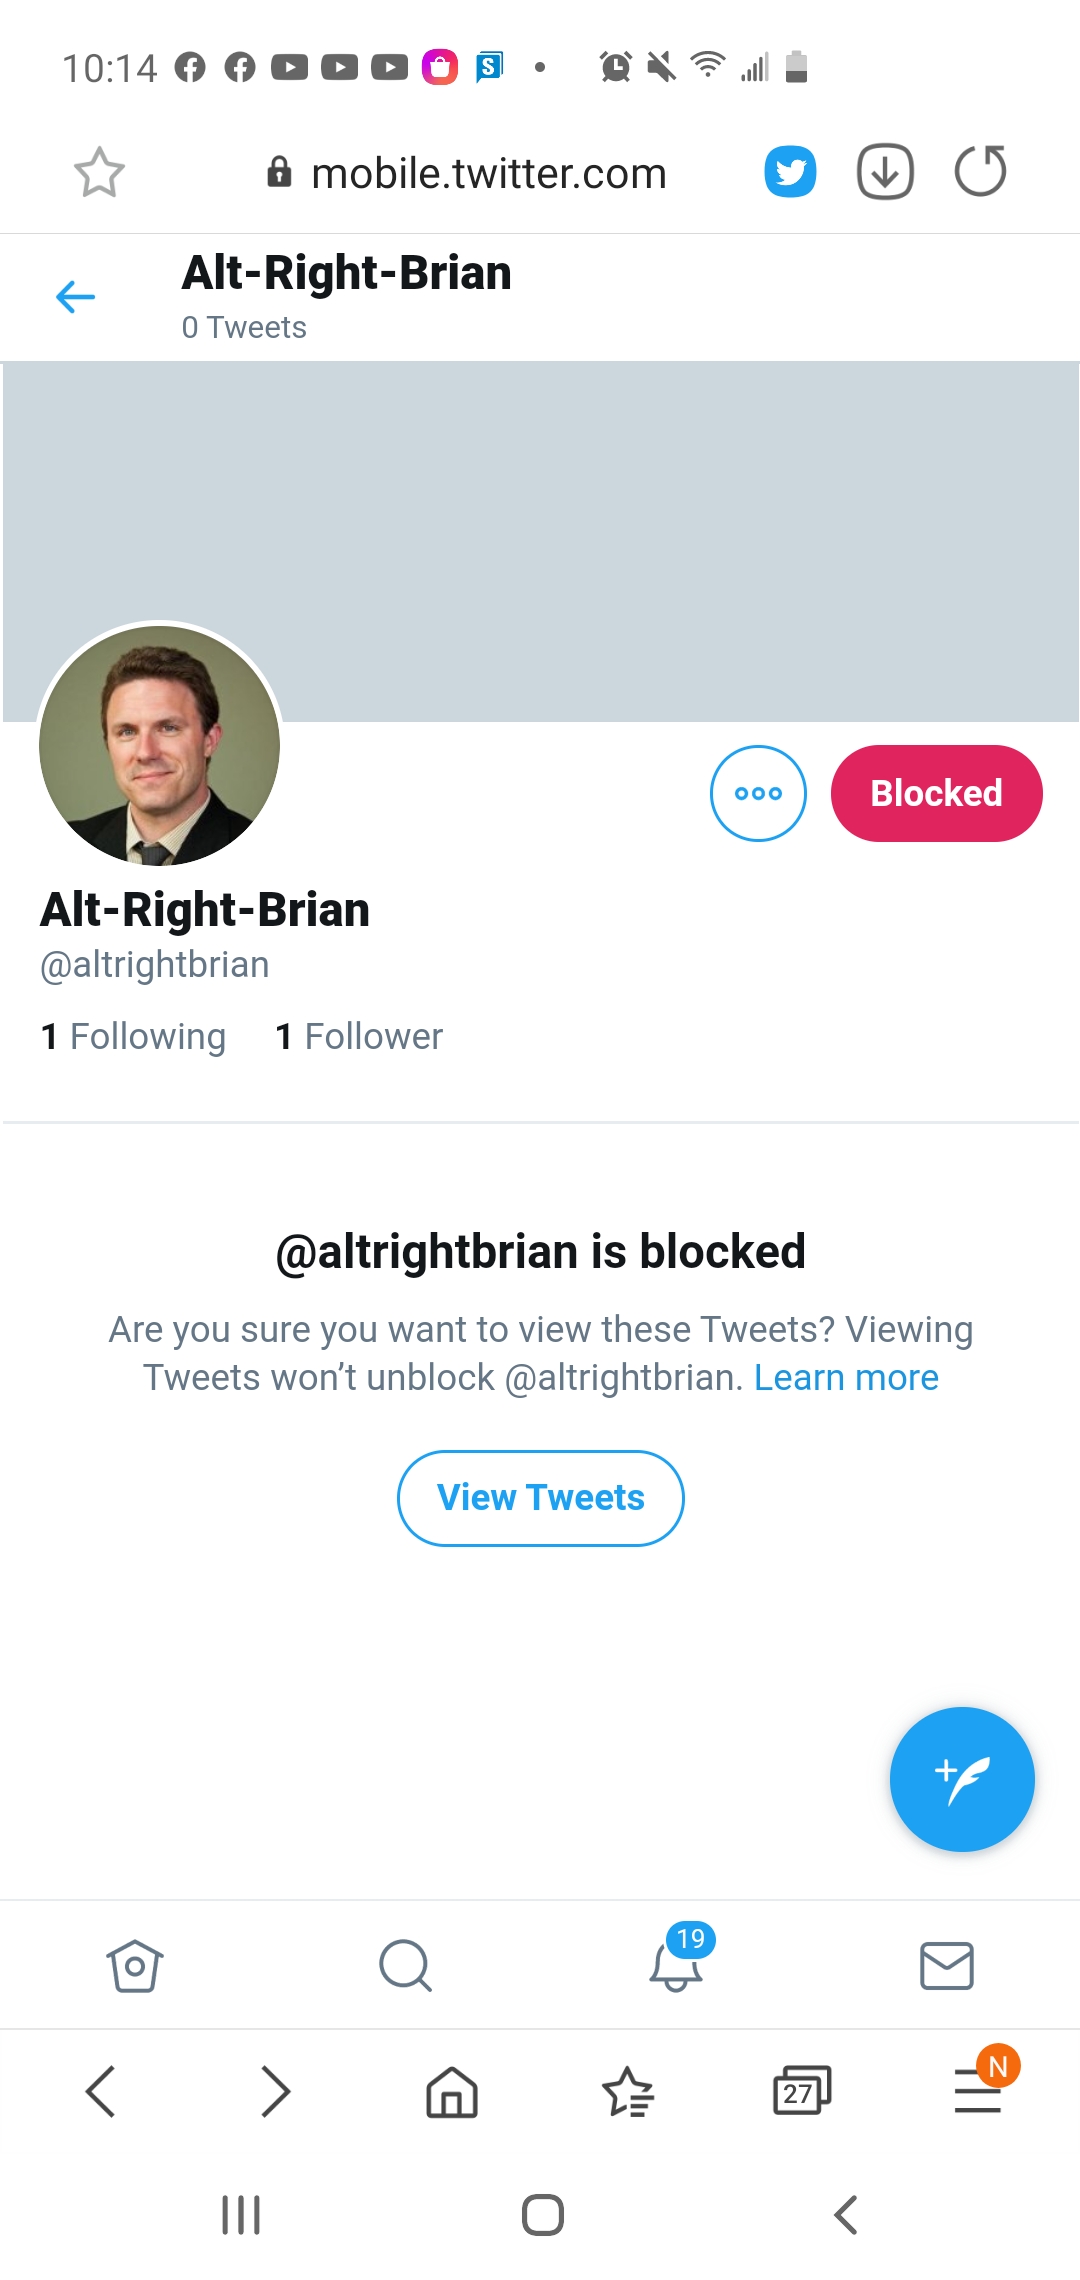 Thomas Madel is now "Alt-Right-Brian" on Twitter!